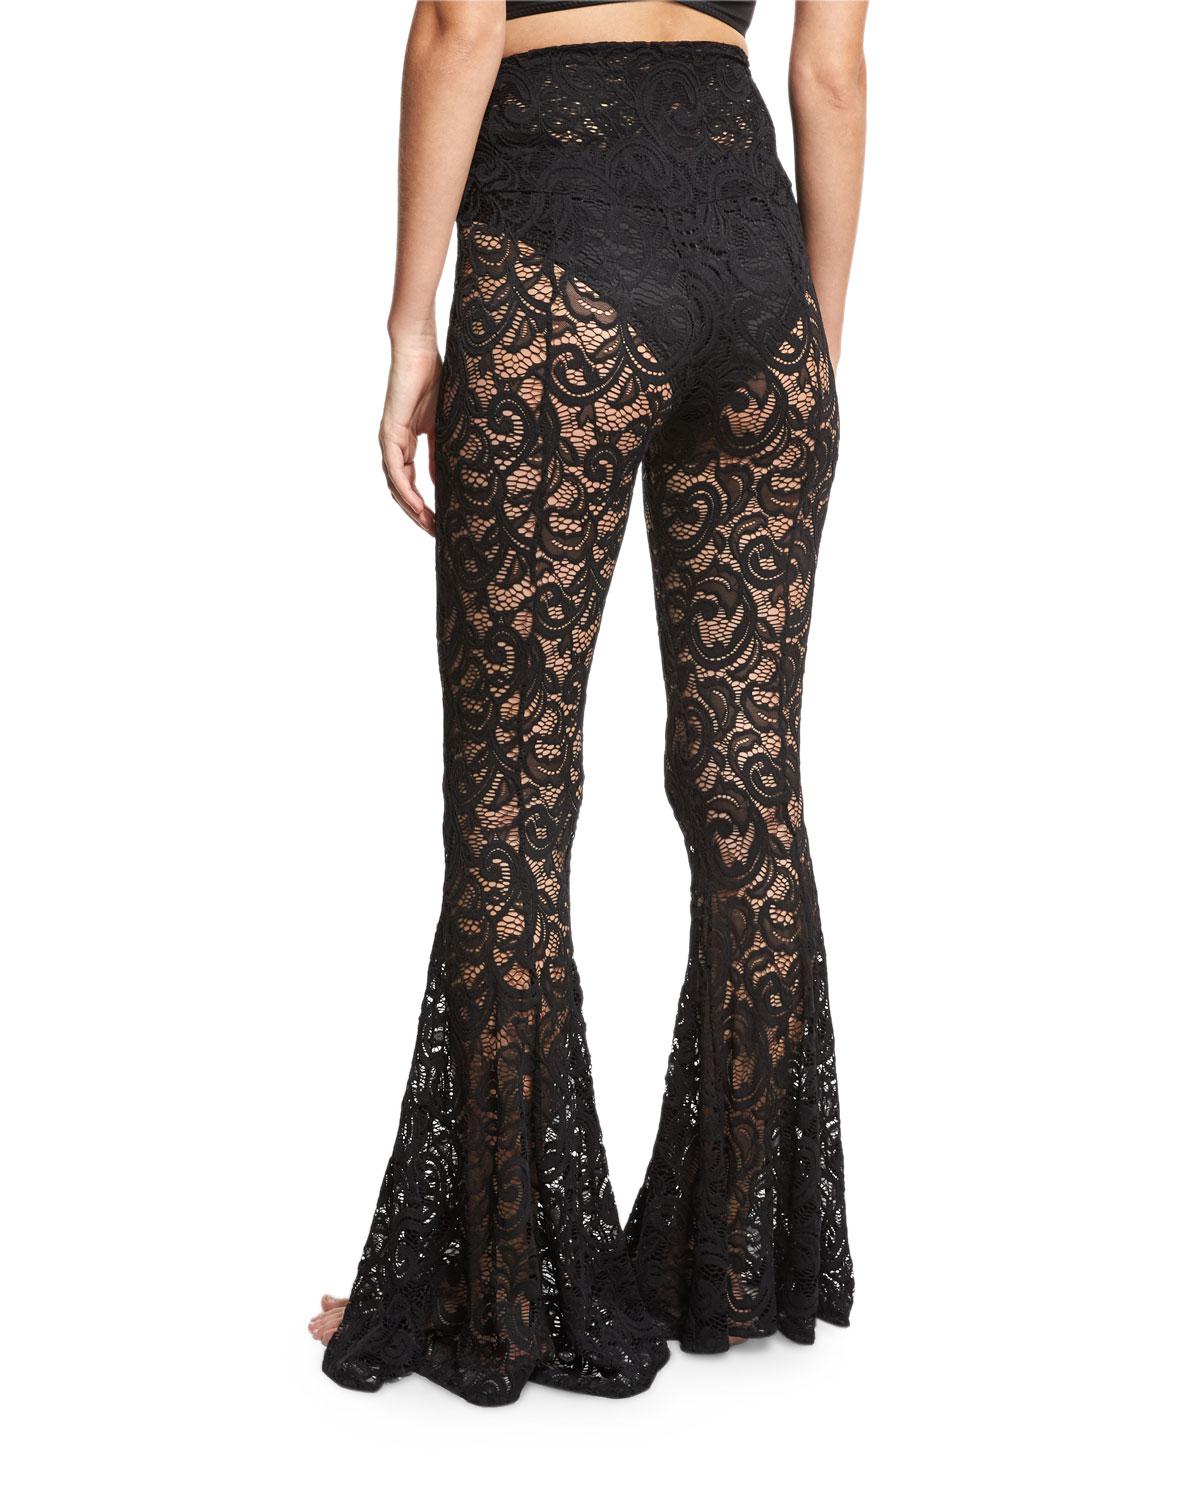 Norma Kamali Fishtail Lace Coverup Pants in Black - Lyst